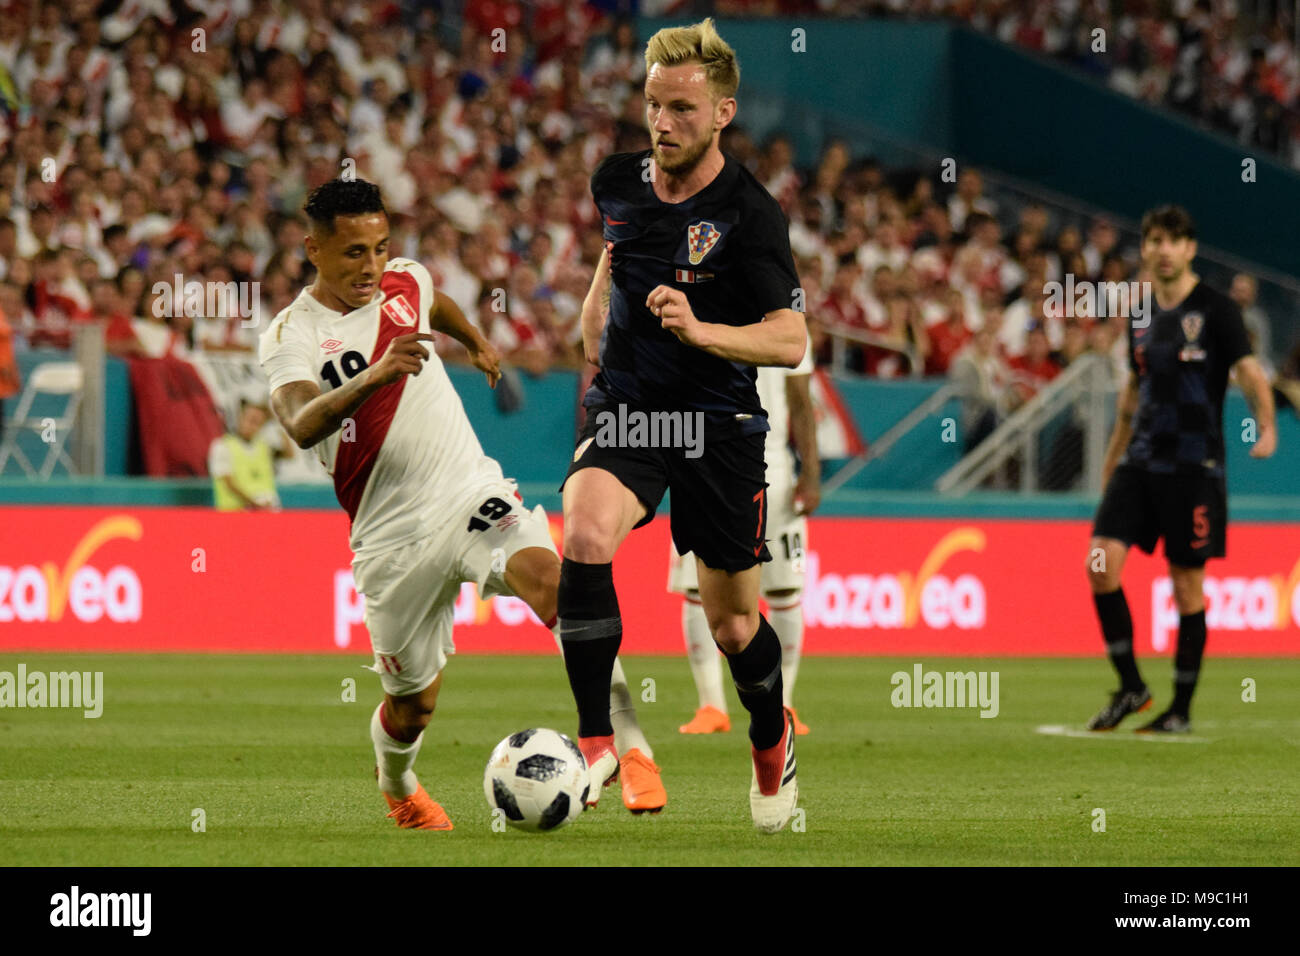 Miami, Florida, USA. 23rd Mar, 2018. Ivan Rakitic attacking in the Peruvian area followed by André Carrillo who seeks to stop him.The Croatian national football team played a friendly match against Peru on 23rd March 2018. Credit: Fernando Oduber/SOPA Images/ZUMA Wire/Alamy Live News Stock Photo